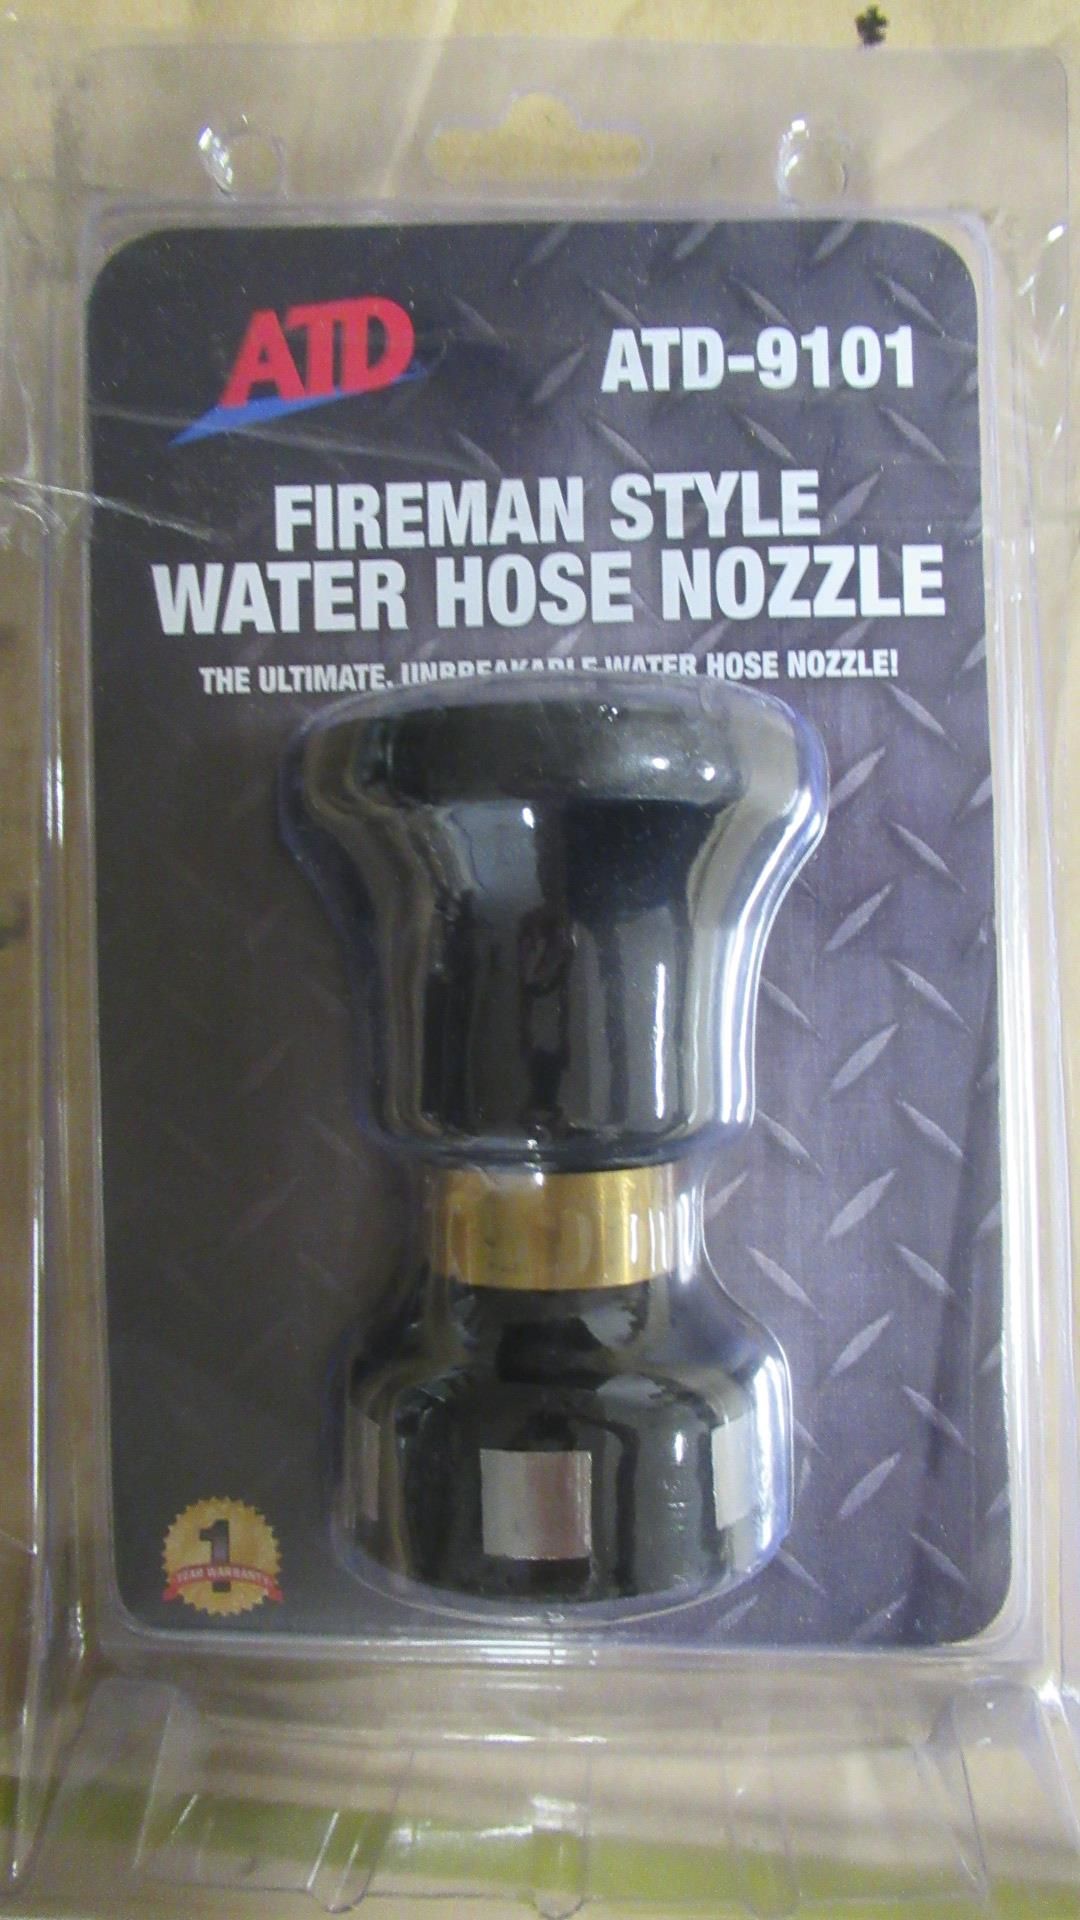 FIREMAN STYLE WATER HOSE NOZZLE ATD 9101